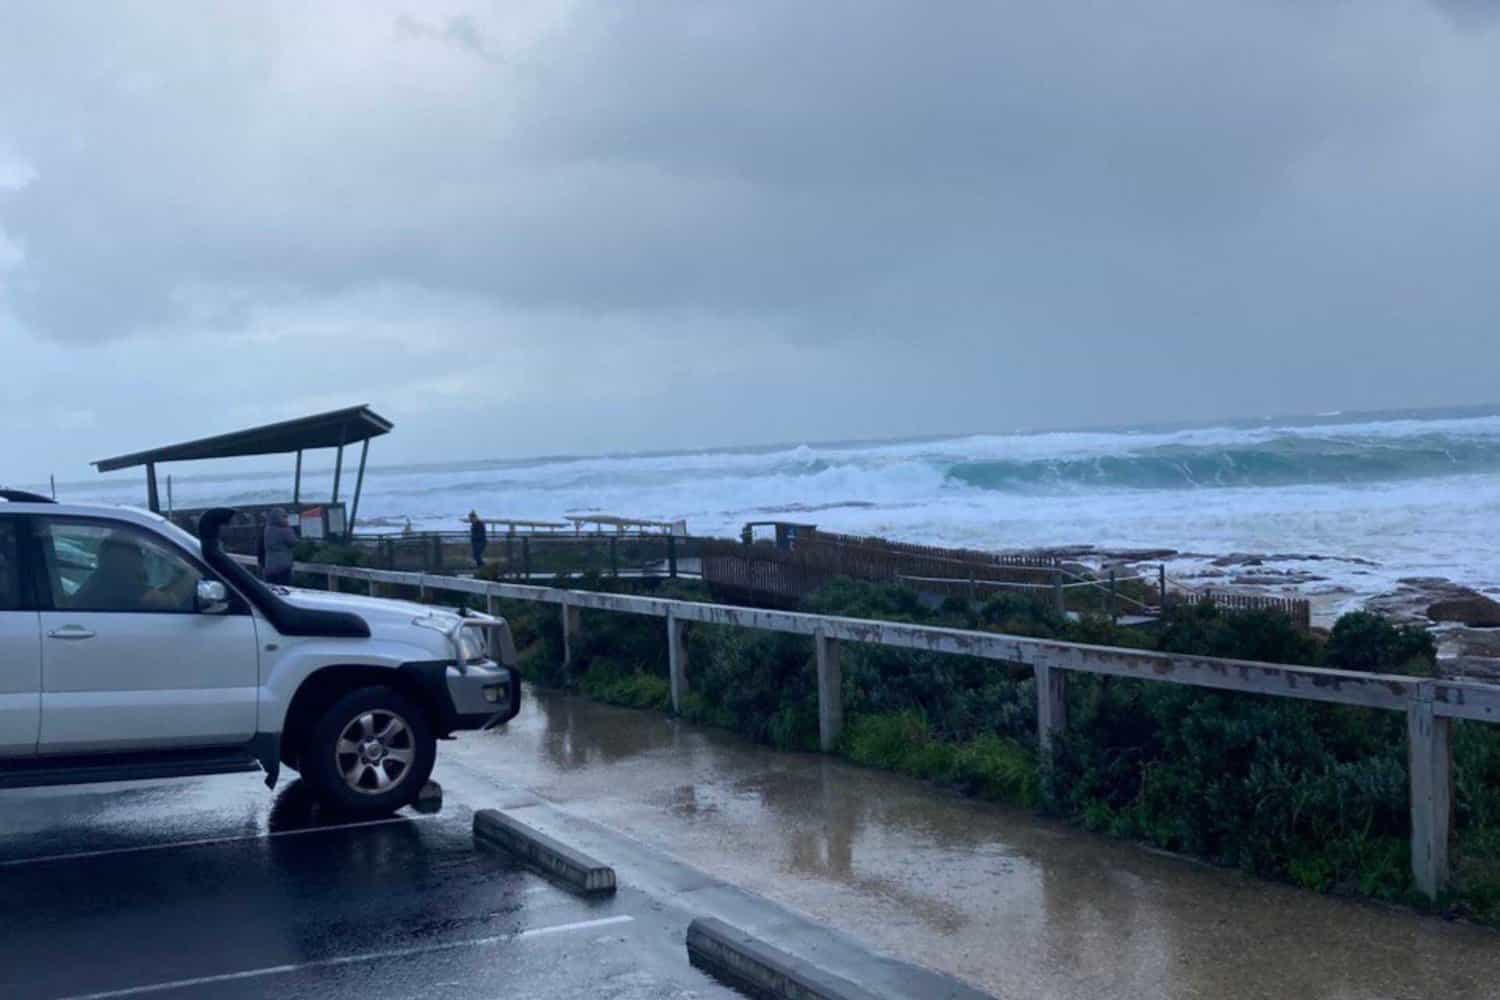 A white SUV parked by a coastal lookout on a stormy day, with turbulent ocean waves in the background, capturing a dramatic and moody seascape along the Australian coast.